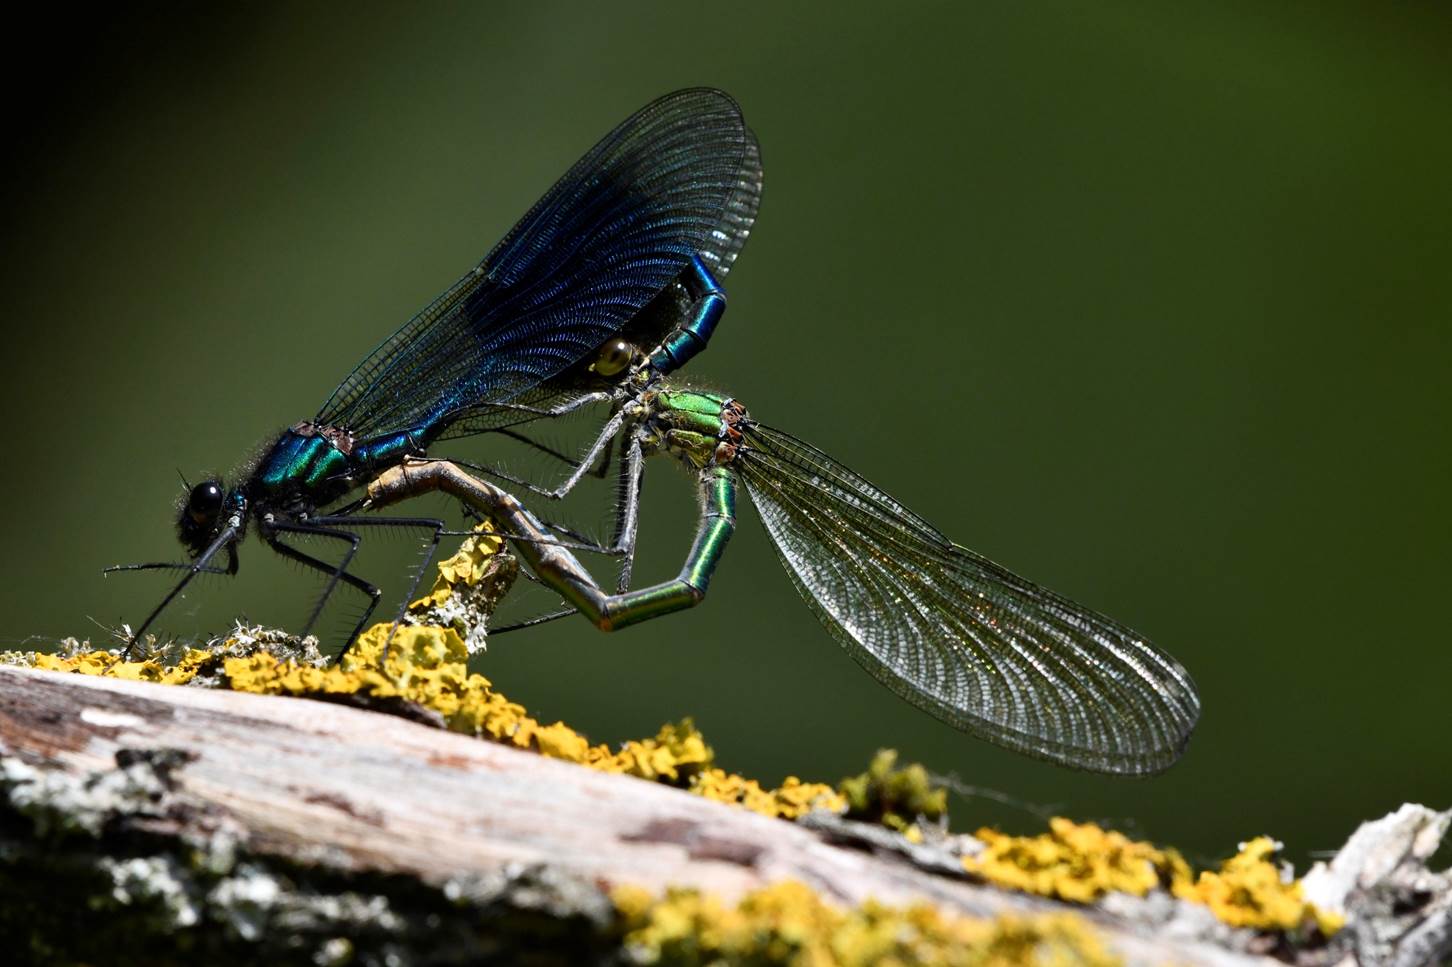 A dragonfly with wings on a branch

Description automatically generated